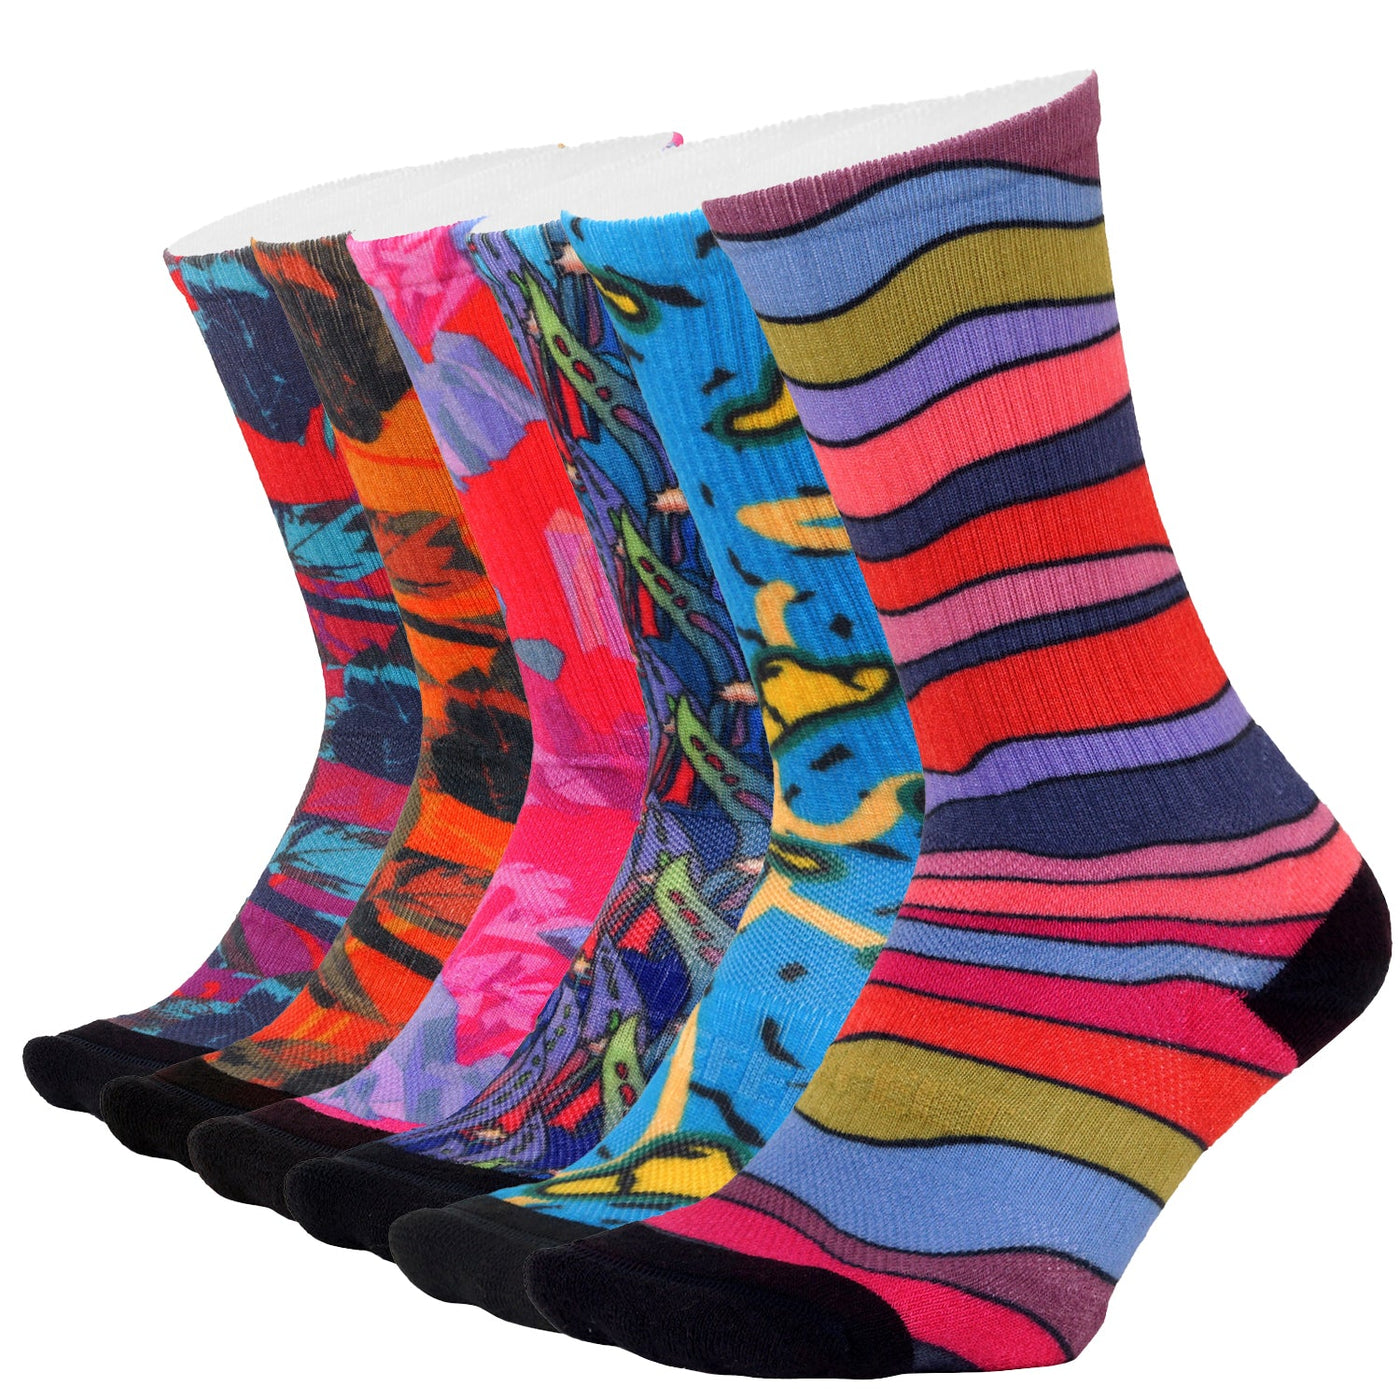 Sub360 All Day Natural Selection - DeFeet